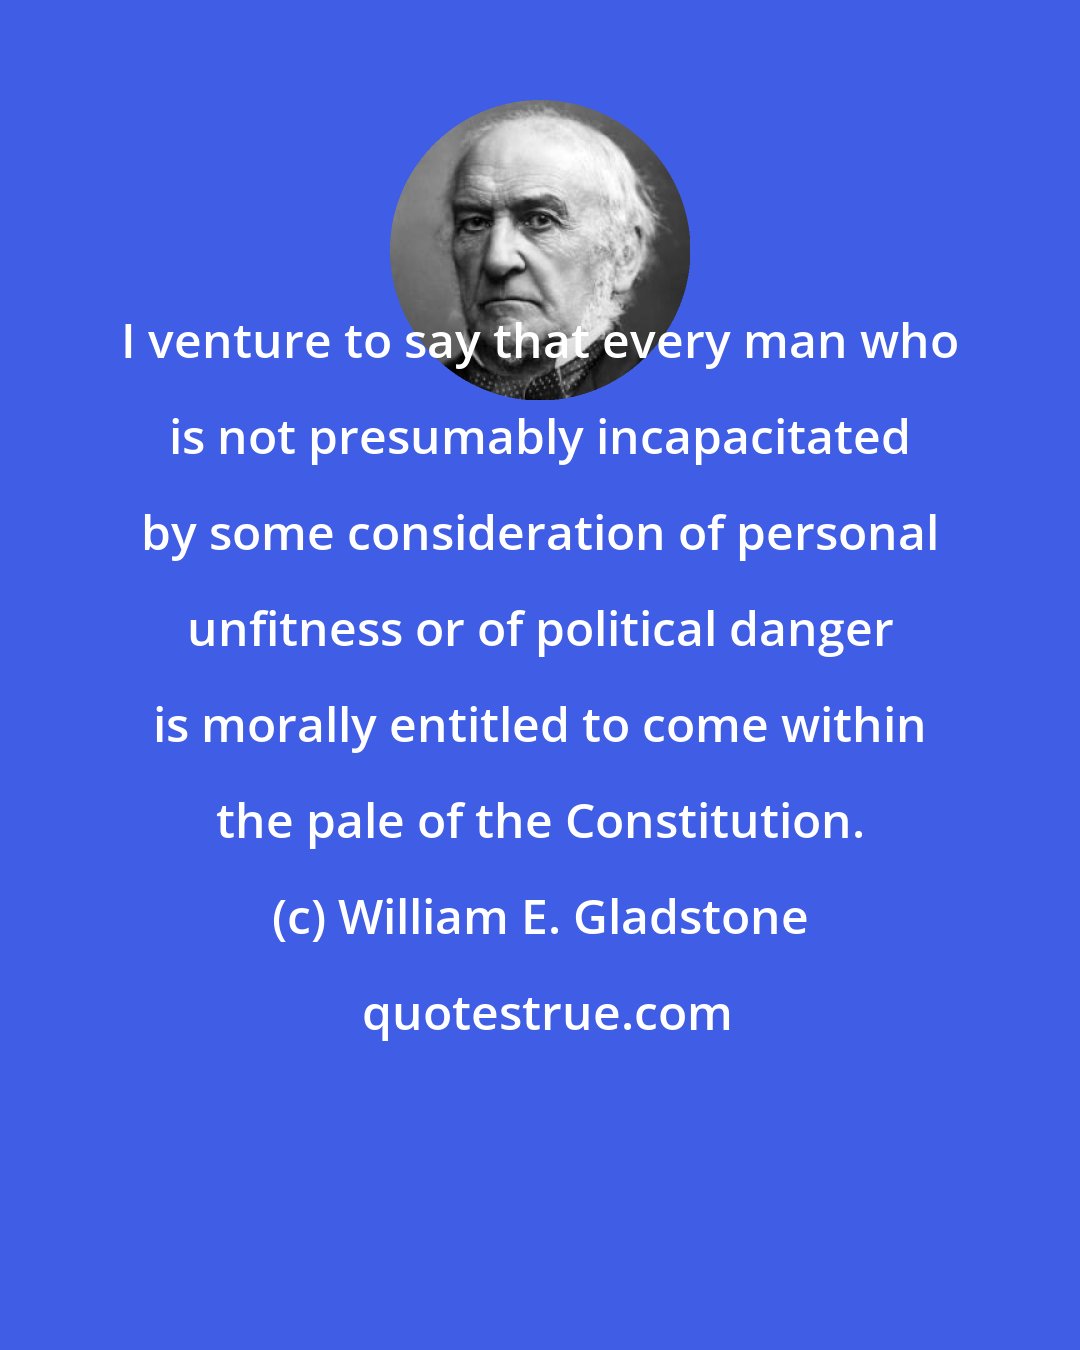 William E. Gladstone: I venture to say that every man who is not presumably incapacitated by some consideration of personal unfitness or of political danger is morally entitled to come within the pale of the Constitution.